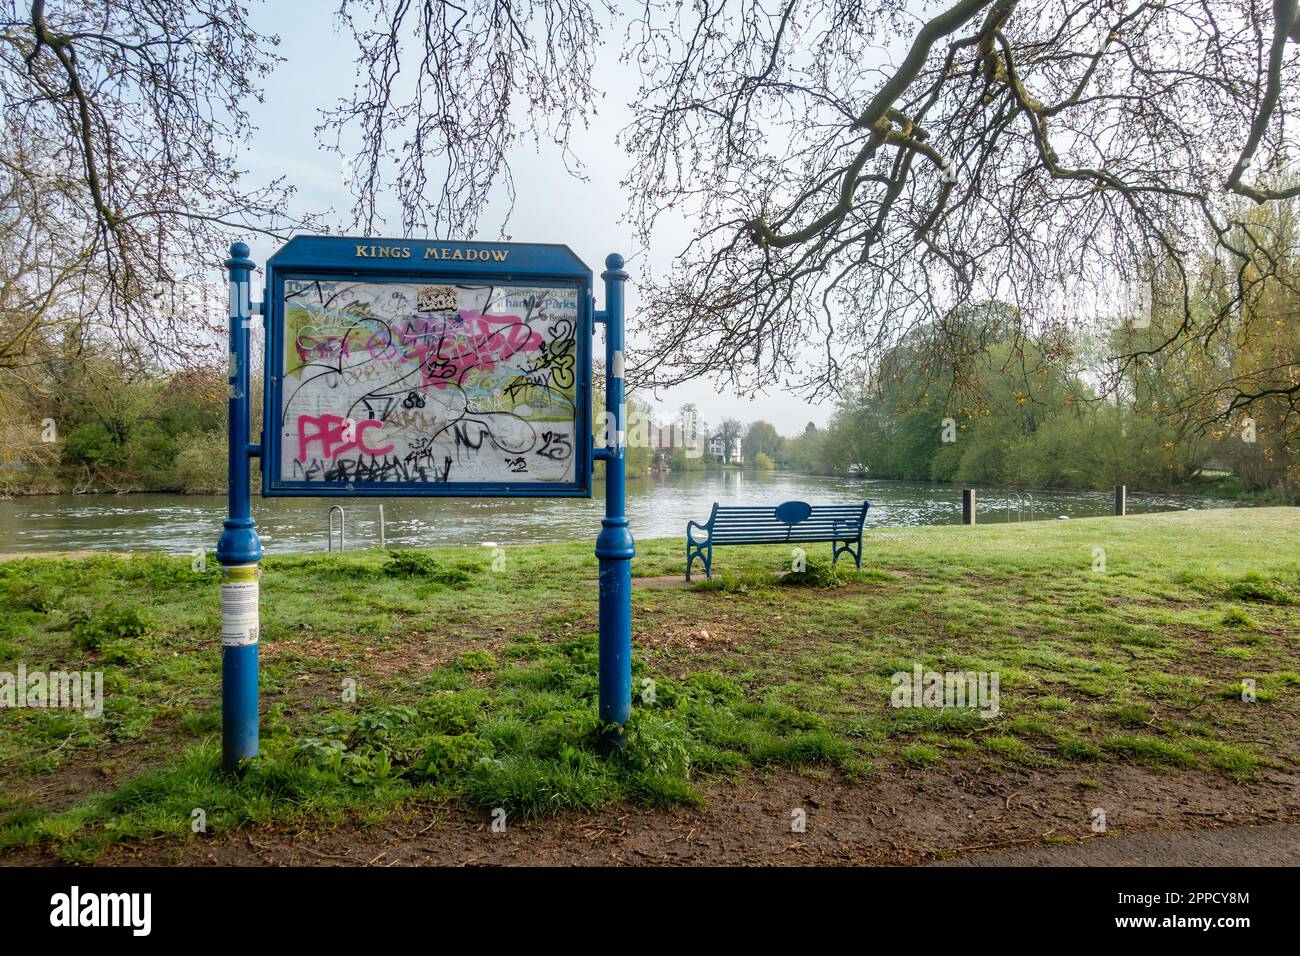 An information board in Kings Meadow park in Reading, UK situated next to The River Thames is vandalised with graafitti Stock Photo